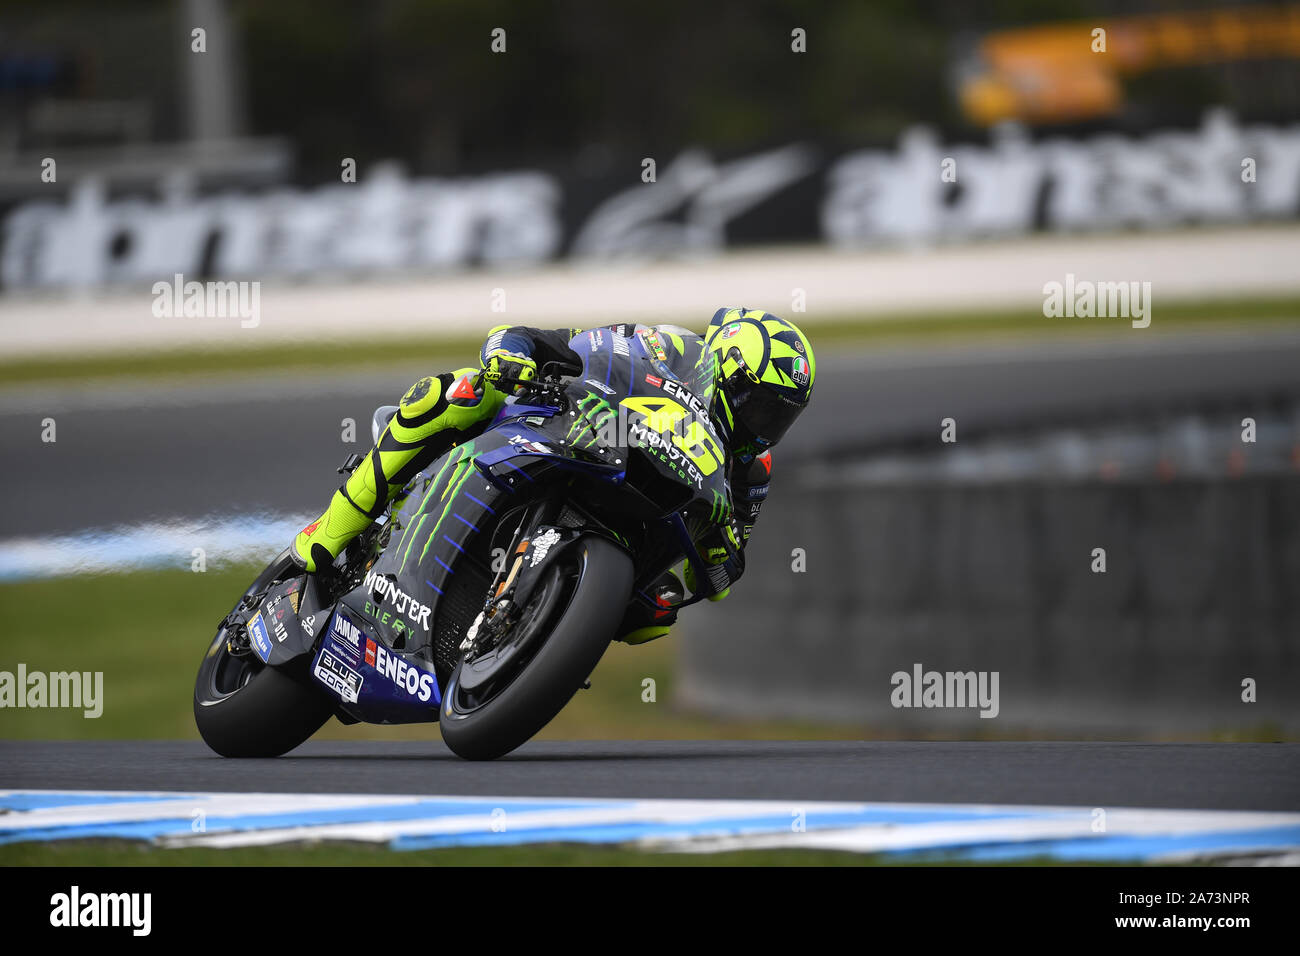 Valentino Rossi High Resolution Stock Photography and Images - Alamy